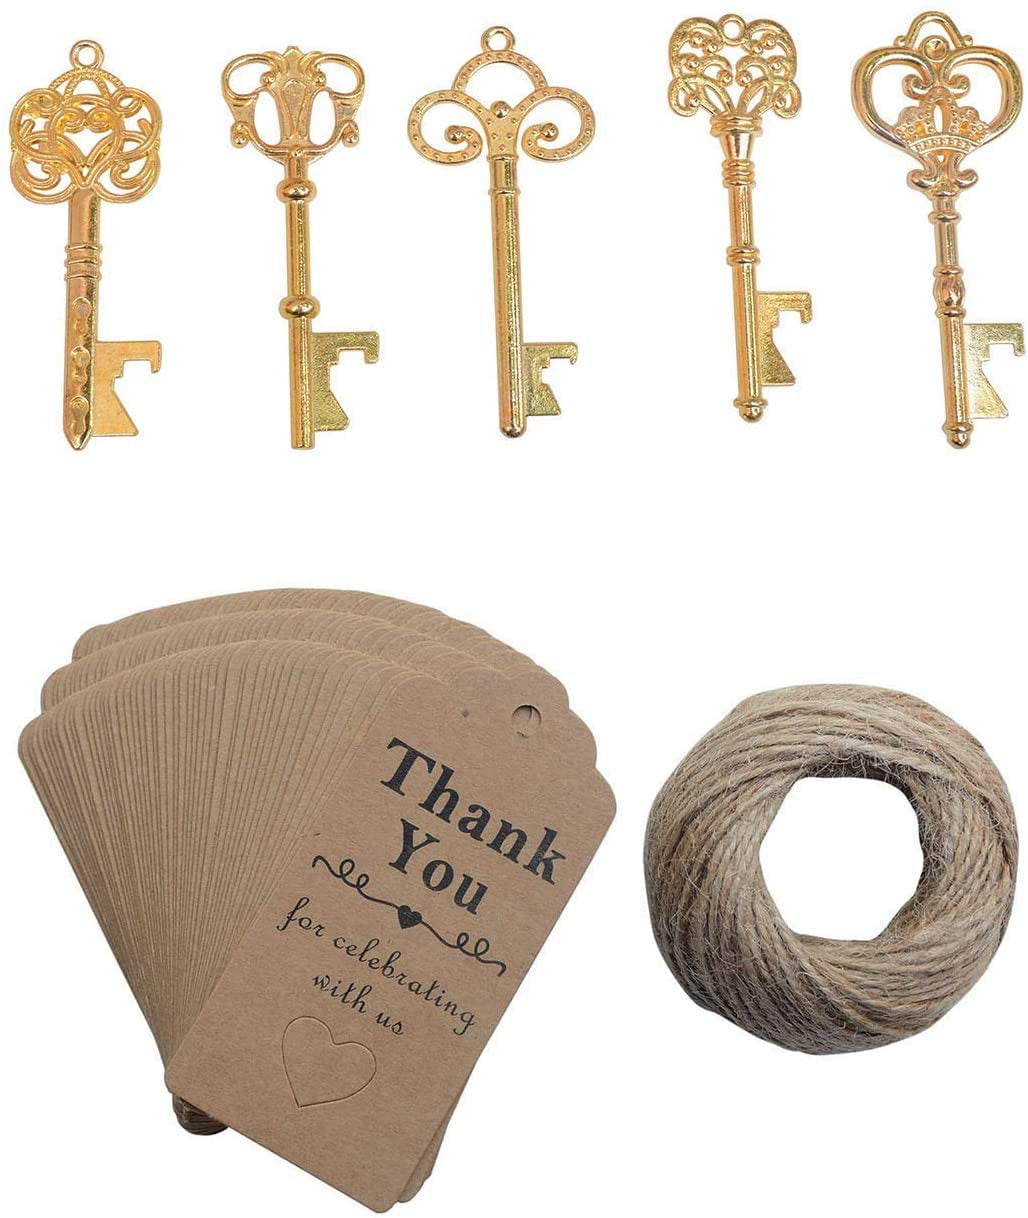 Bronze Tone,5 styles 50pcs Skeleton Key Bottle Opener Wedding Party Favor Souvenir Gift with Escort Tag and Jute Rope 